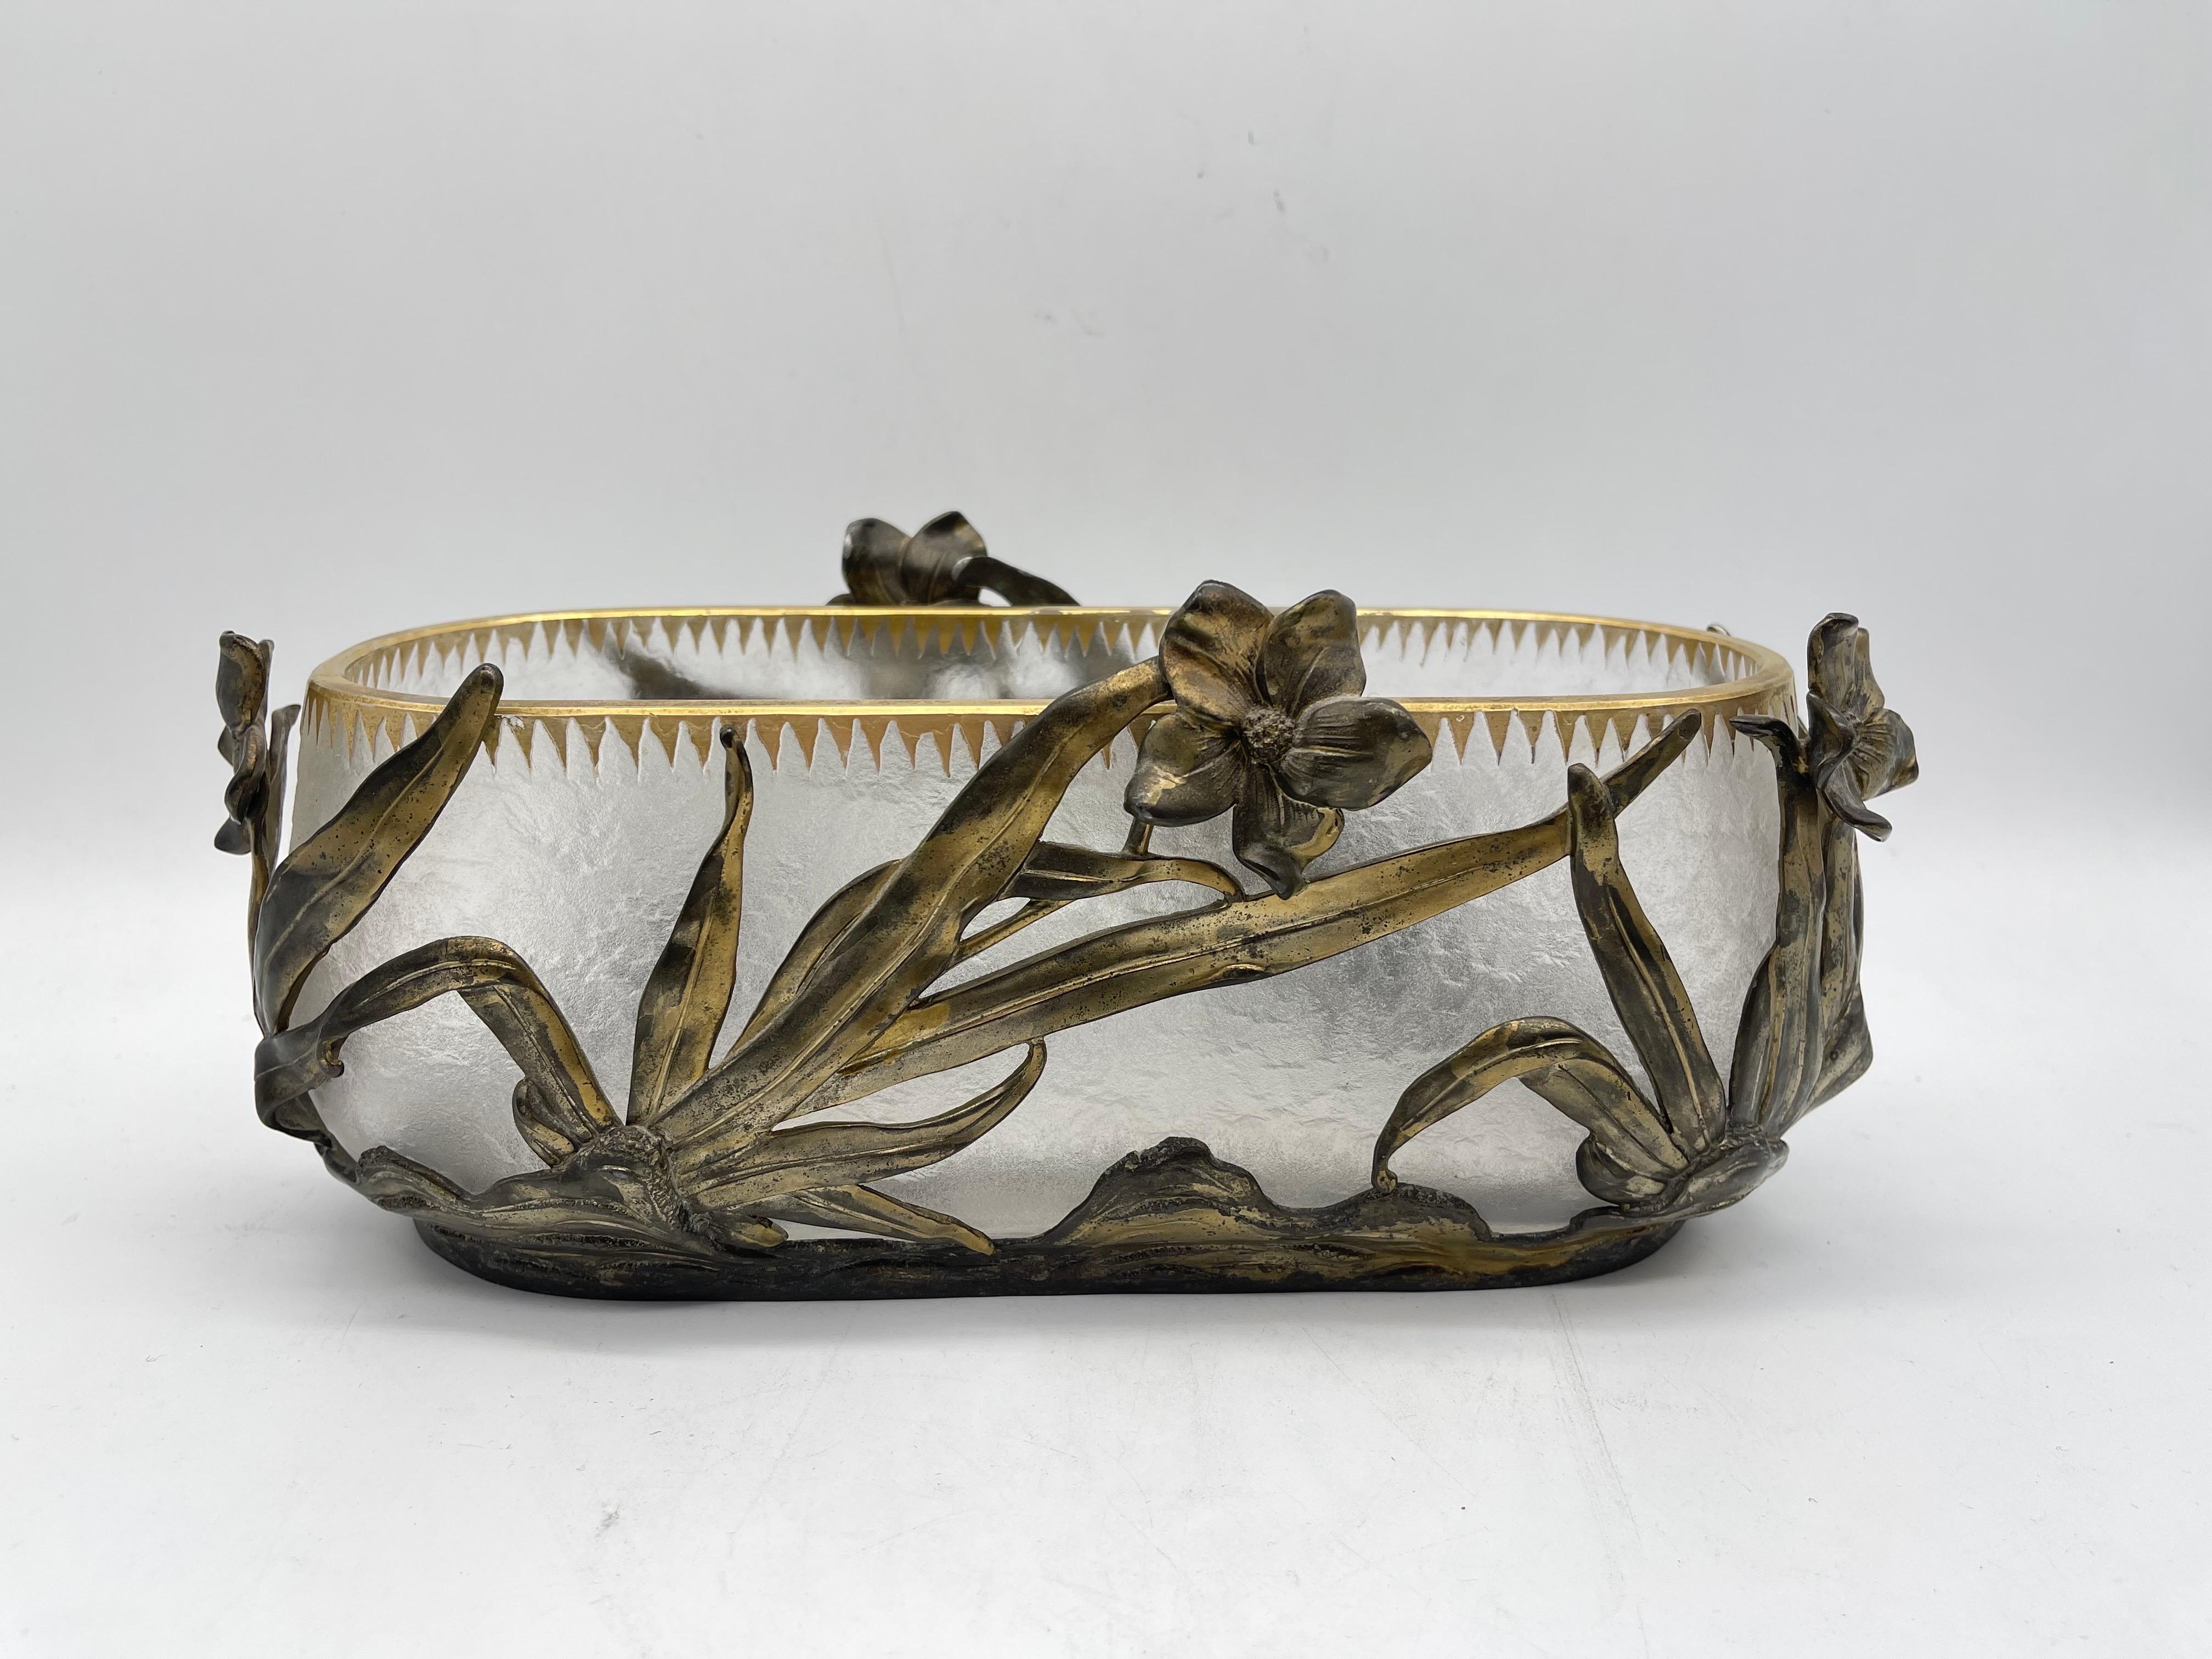 Wonderful Antique Jardiniere / Planter with Glass insert
Legras - Art Nouveau 

Condition can be seen in pictures